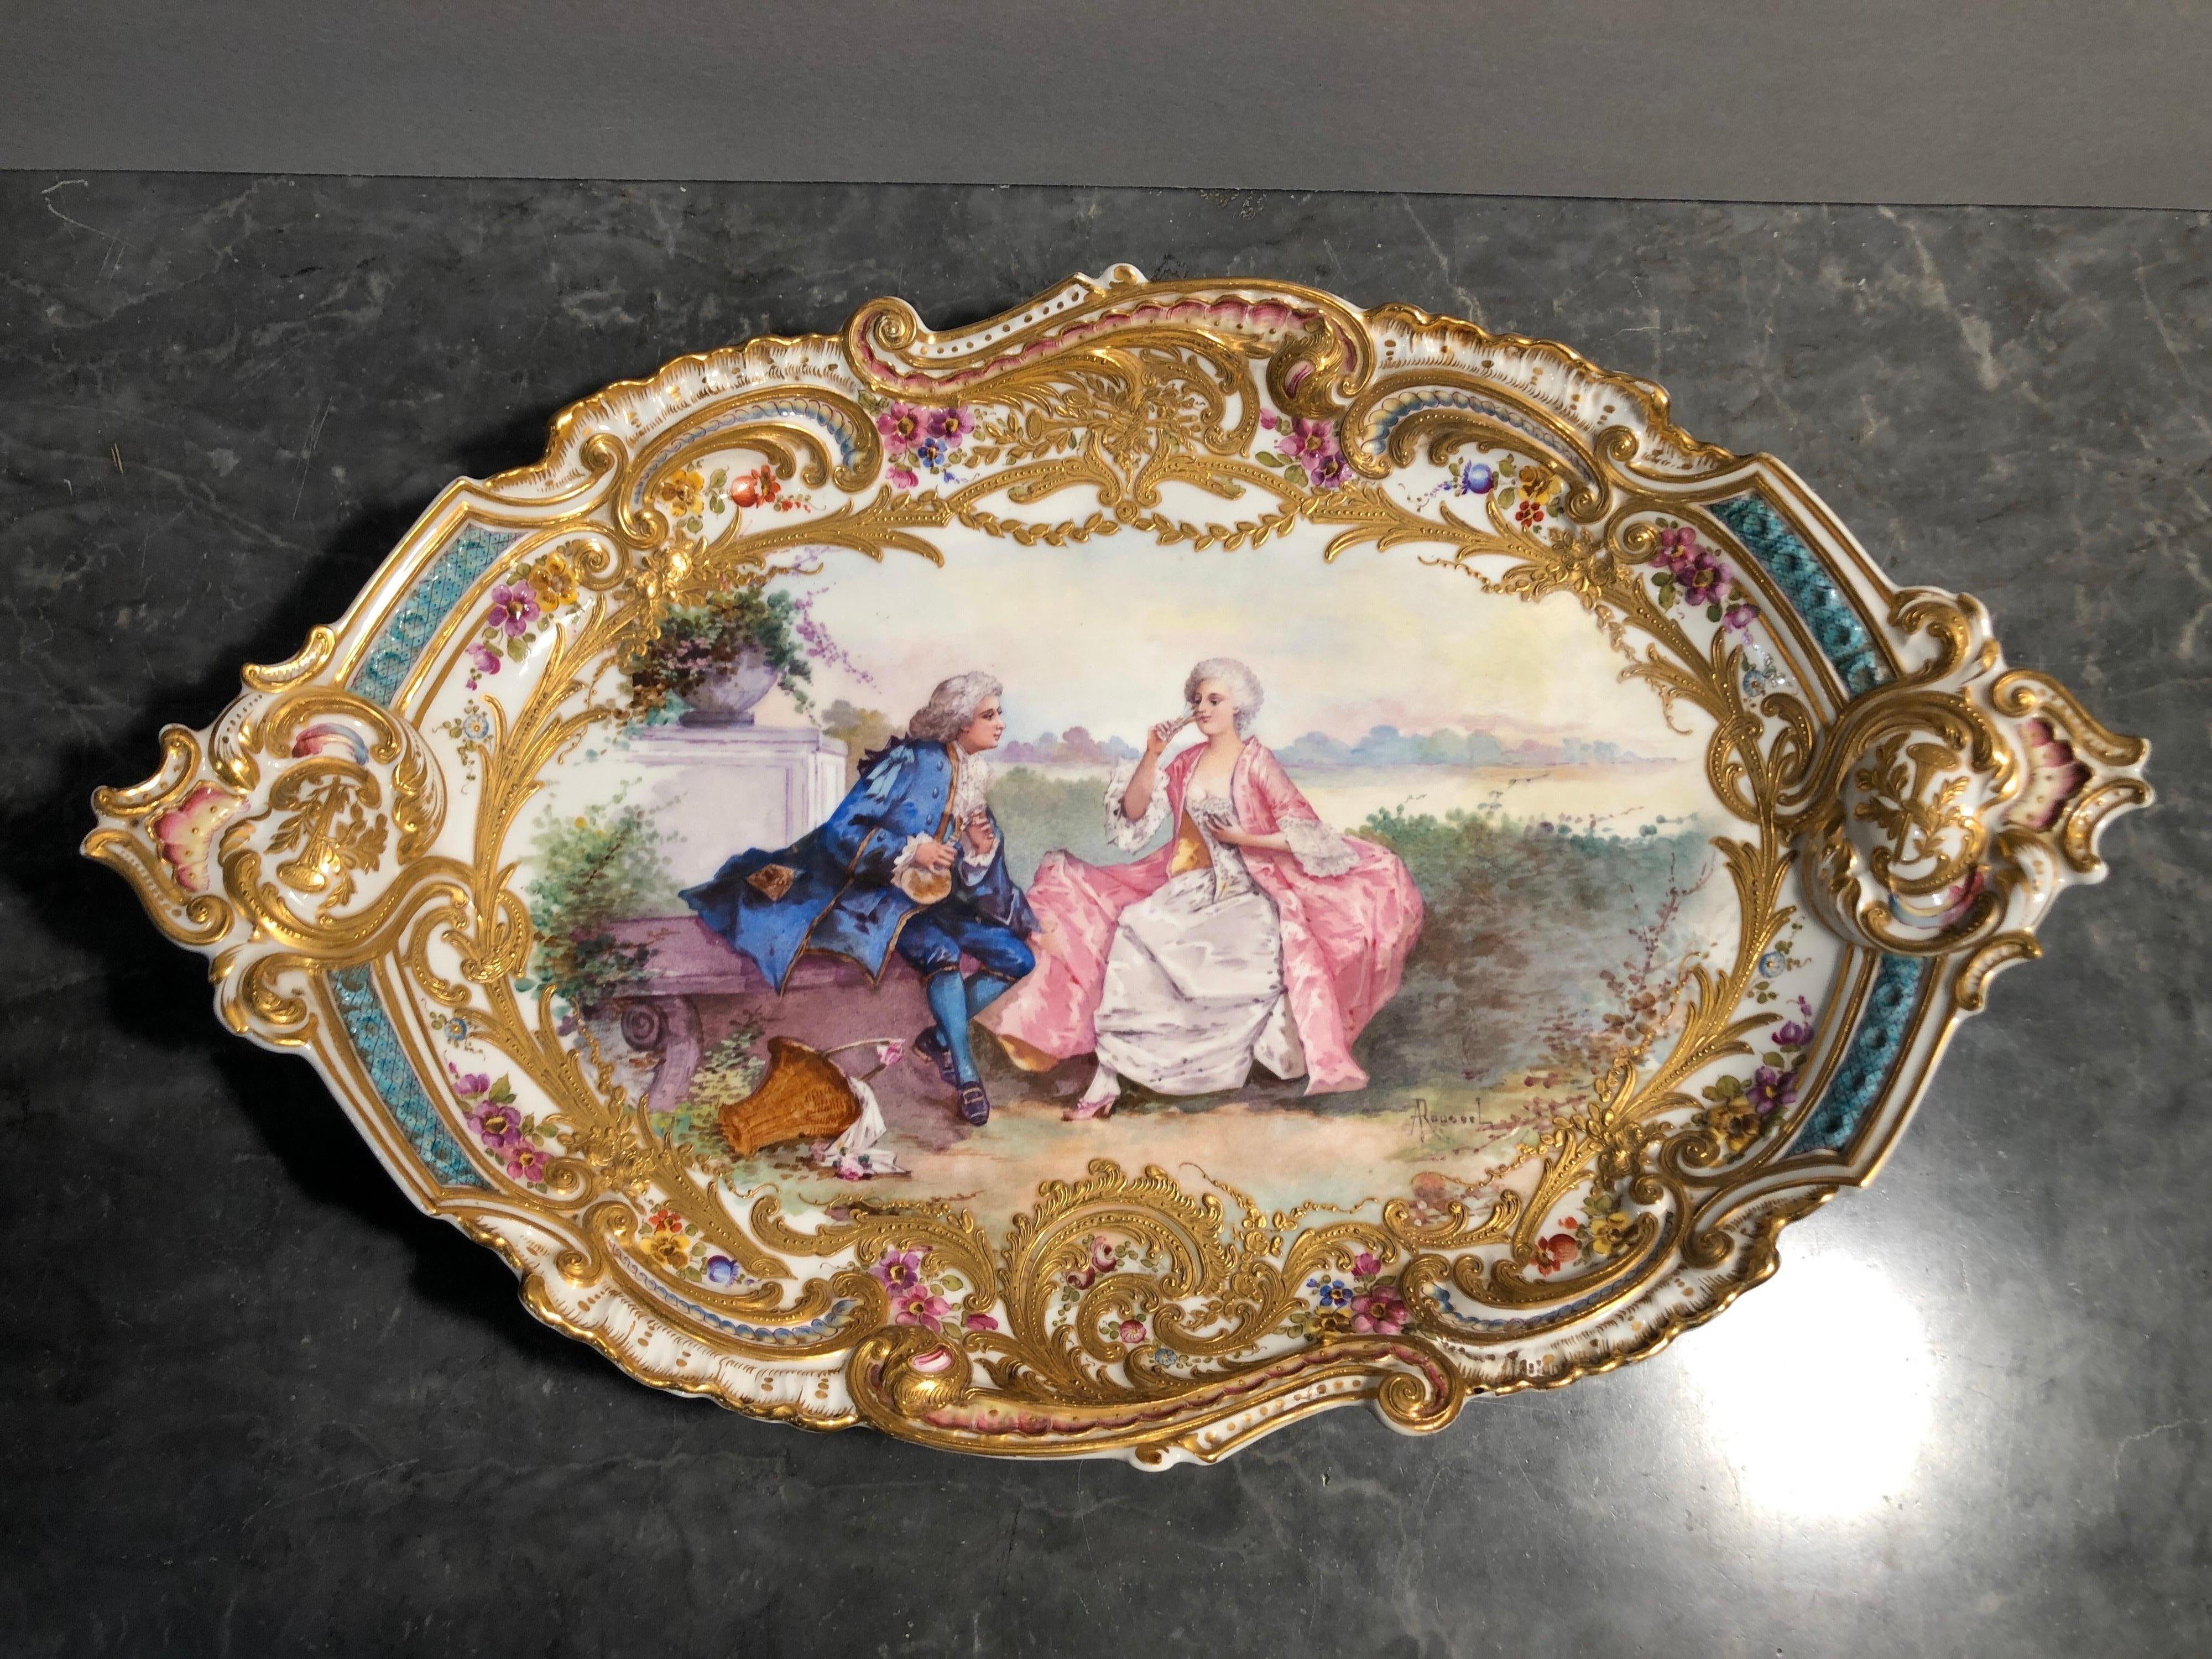 French painted porcelain plate, of incredible beauty, in a state of conservation as new. Sévres 1758, signed lower right, Roussel, active from 1758-1774. Of considerable size and with an internal relief work.